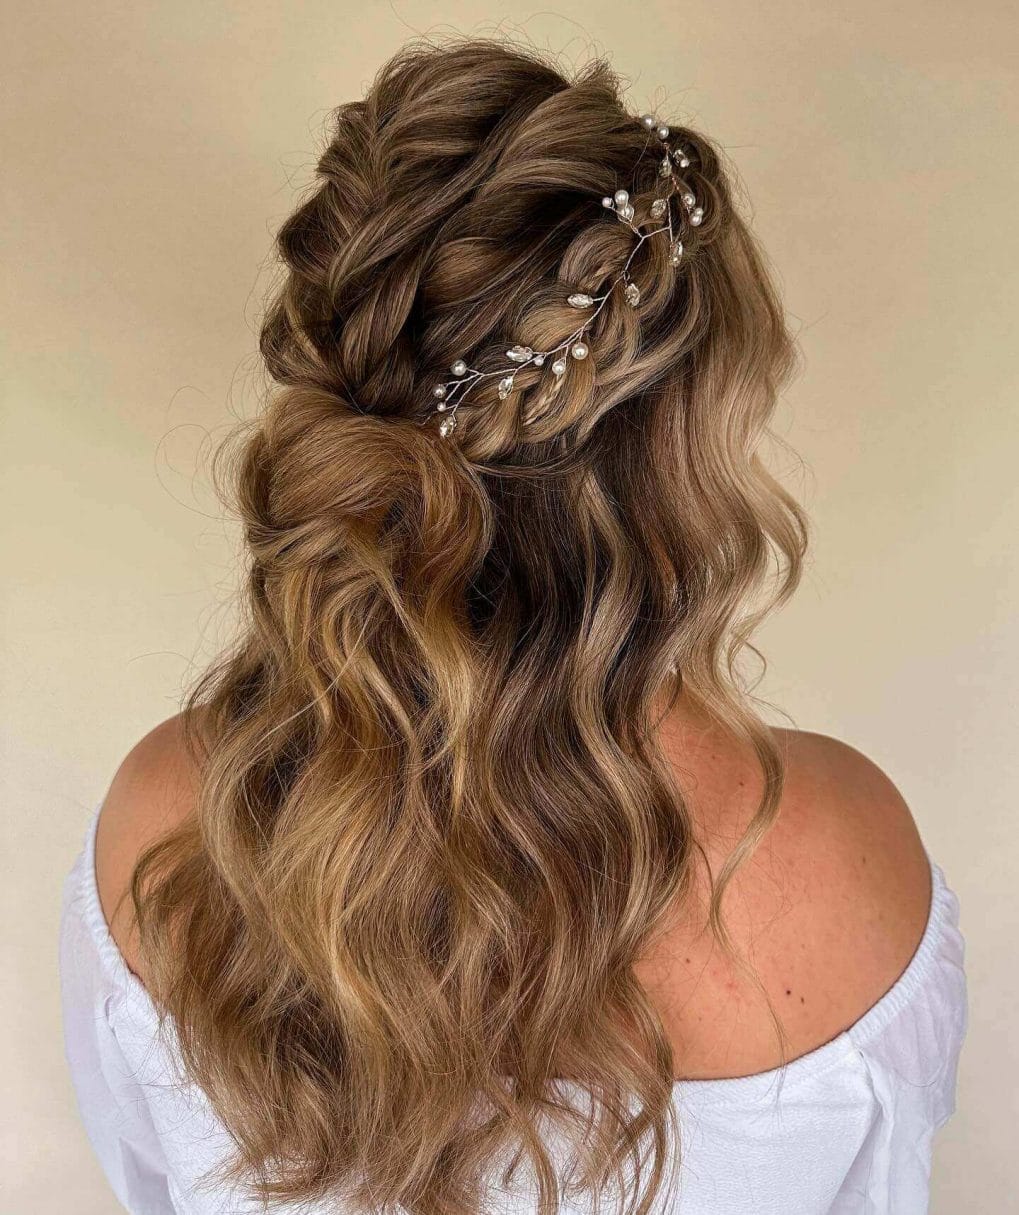 Honey-blonde French braid with delicate hair accessories